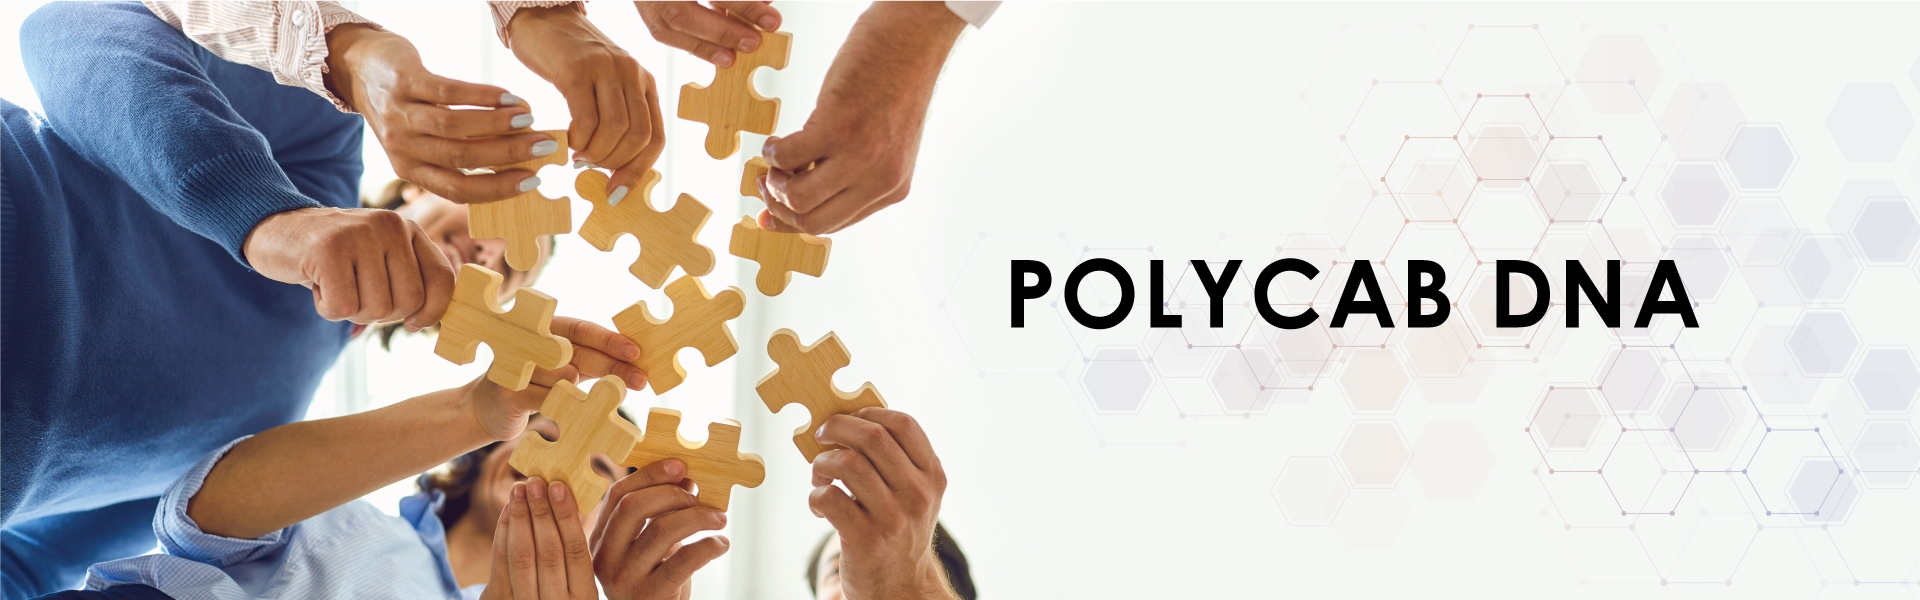 Polycab vision enhancing stakeholder value nse bse